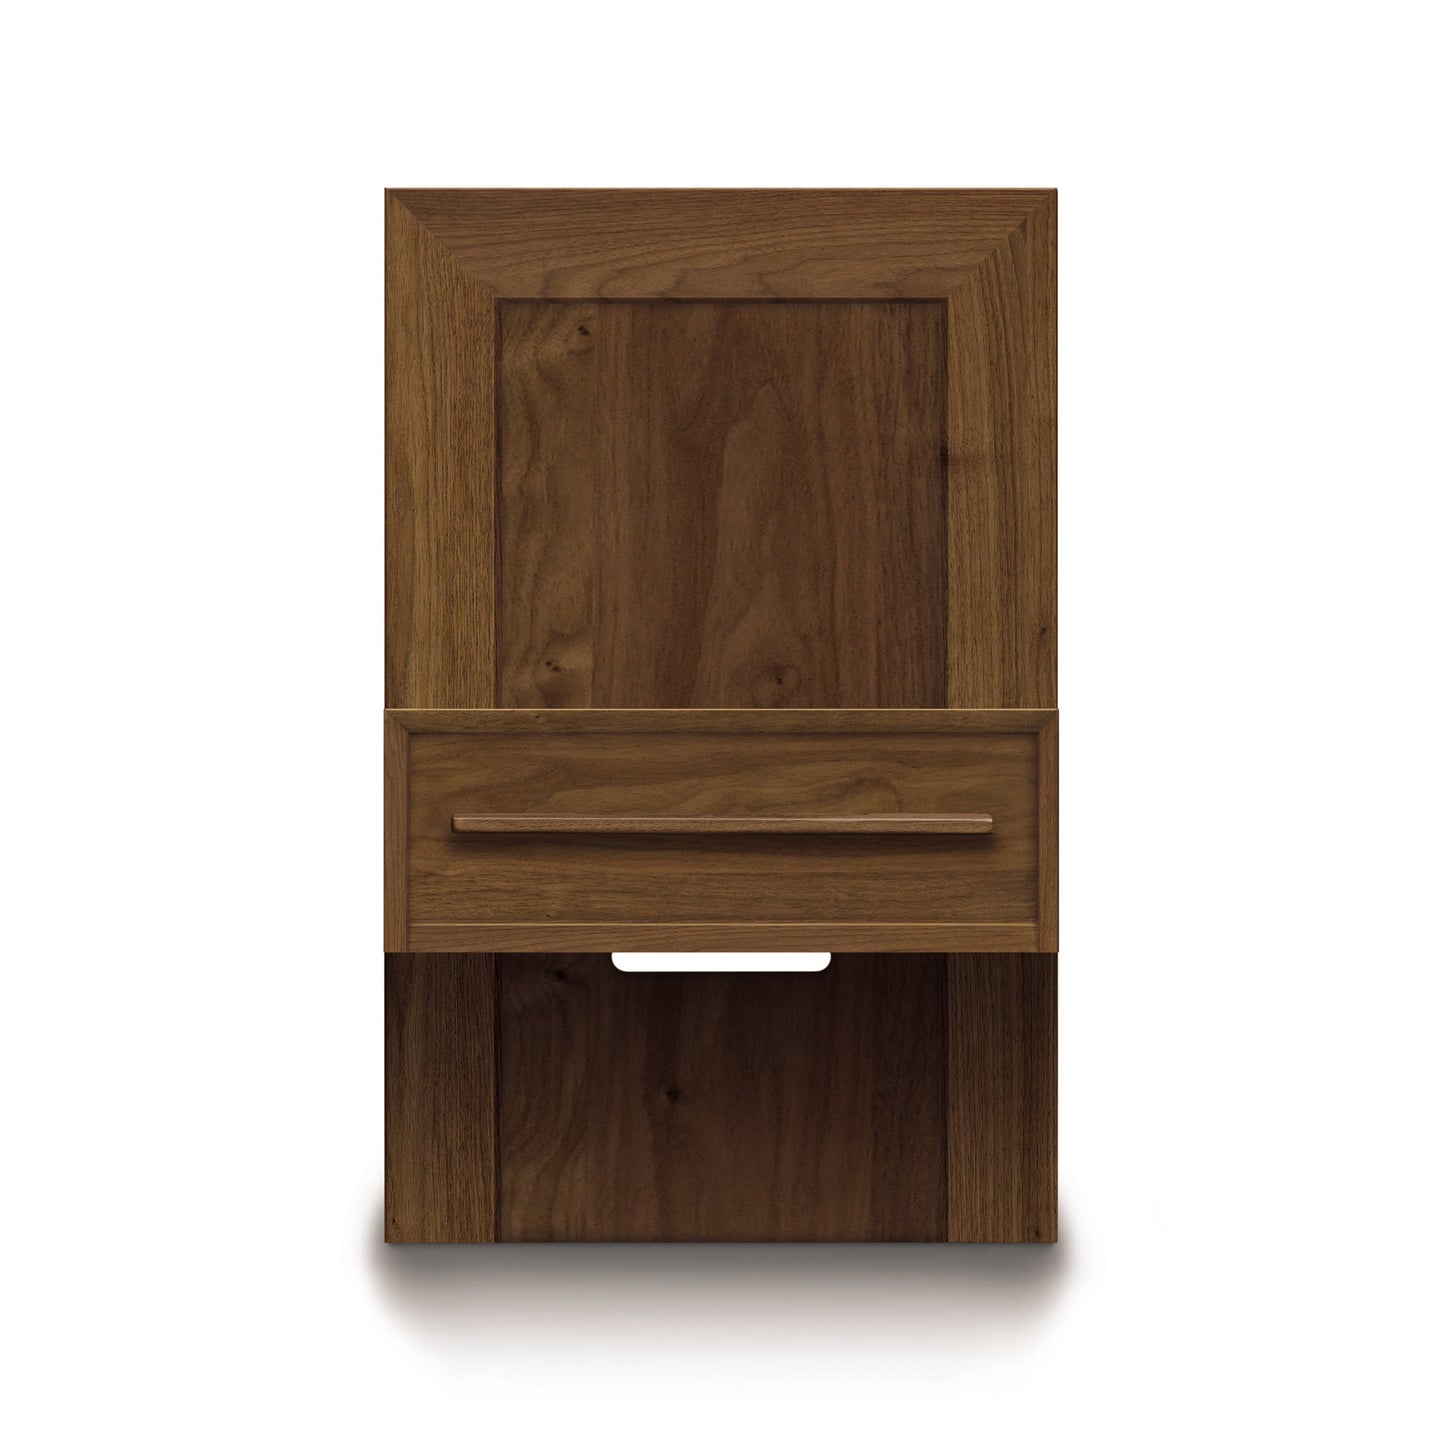 A Moduluxe Attached Nightstand with Drawer - 29" Series made from eco-friendly natural woods on a white background.